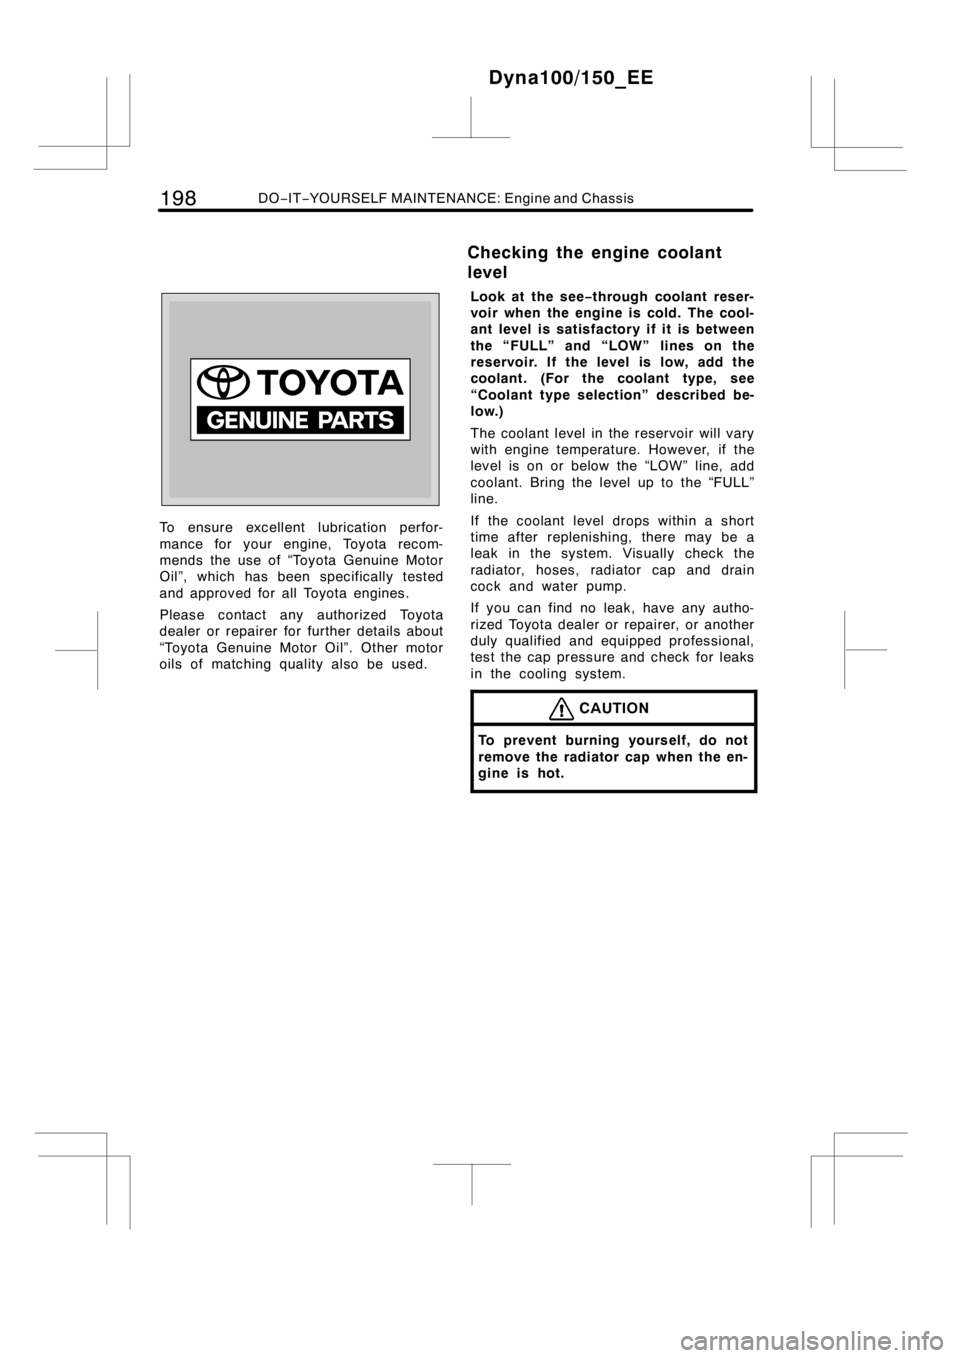 TOYOTA DYNA 100/150 2012  Owners Manual (in English) 198DO−IT−YOURSELF MAINTENANCE: Engine and Chassis
To ensure excellent lubrication perfor-
mance for your engine, Toyota recom-
mends the use of “Toyota Genuine Motor
Oil”, which has been speci